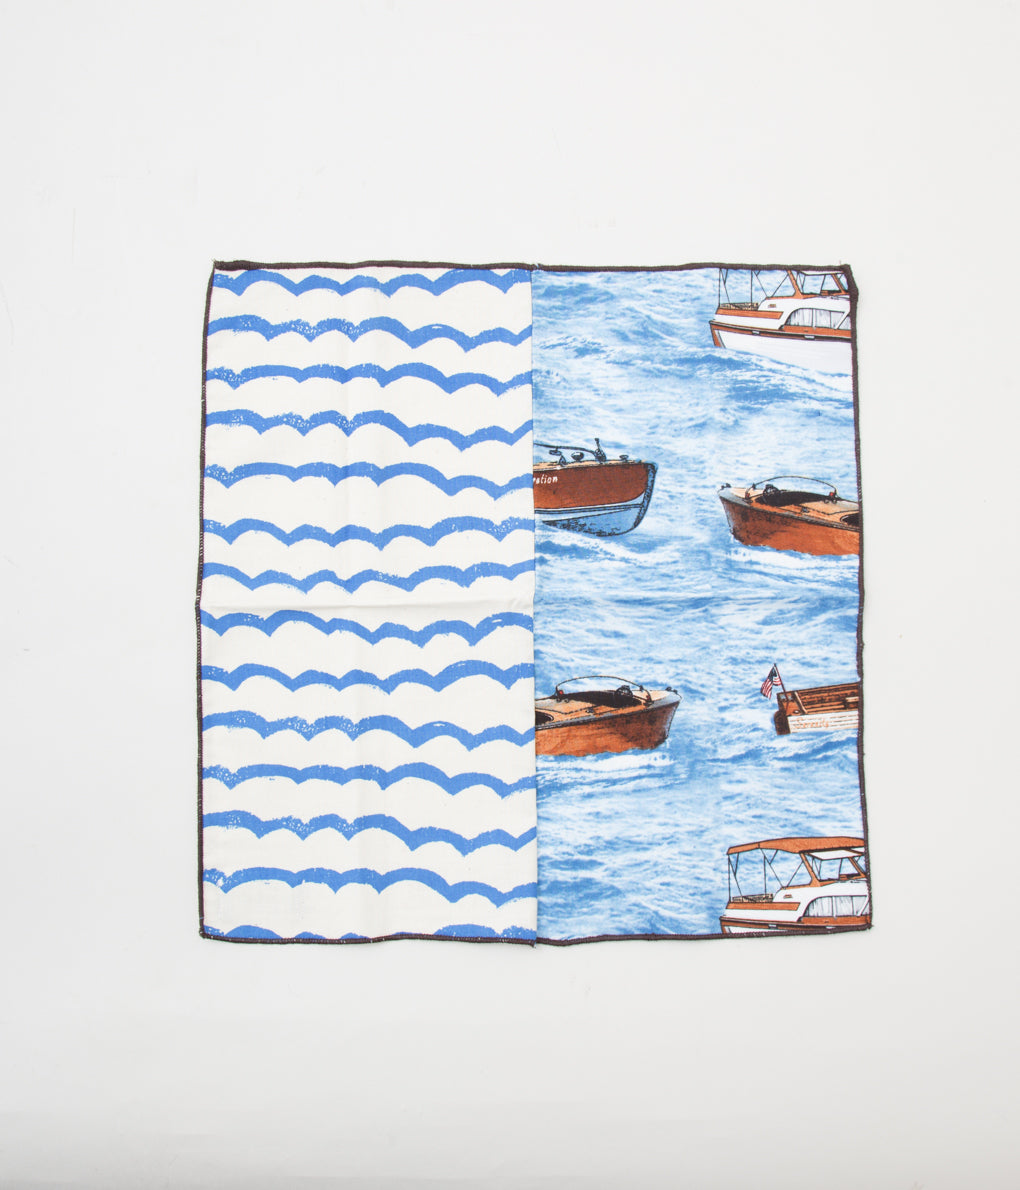 FINE AND DANDY "POCKET SQUARES" (BOATING PANELLED)